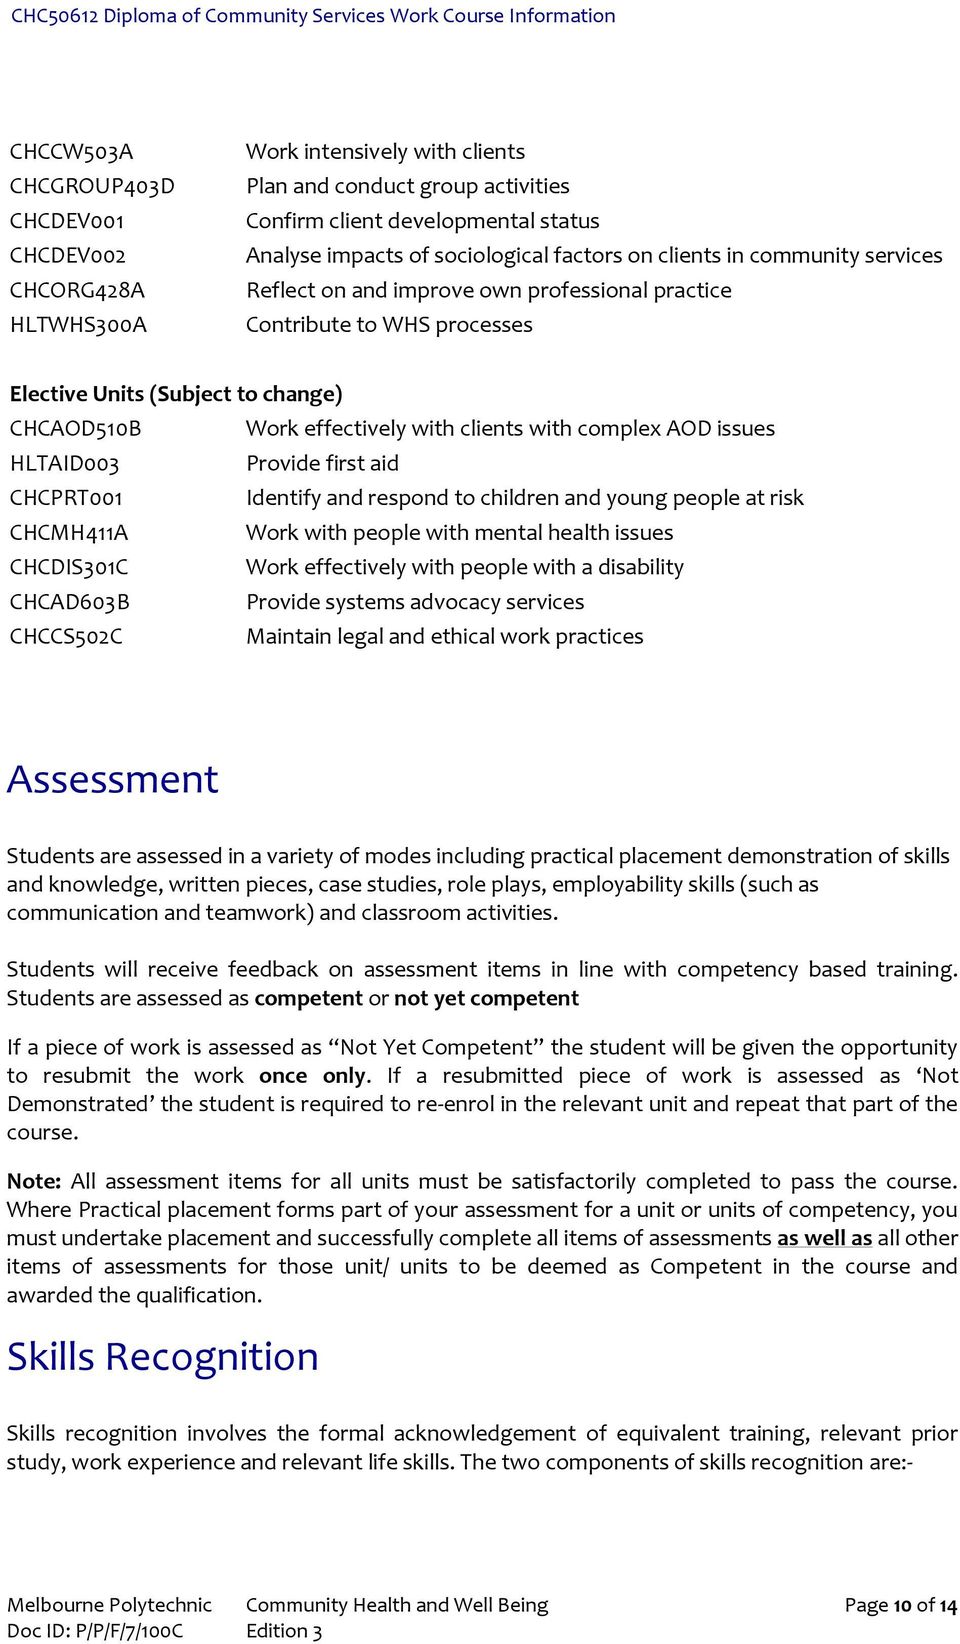 complex AOD issues HLTAID003 Provide first aid CHCPRT001 Identify and respond to children and young people at risk CHCMH411A Work with people with mental health issues CHCDIS301C Work effectively